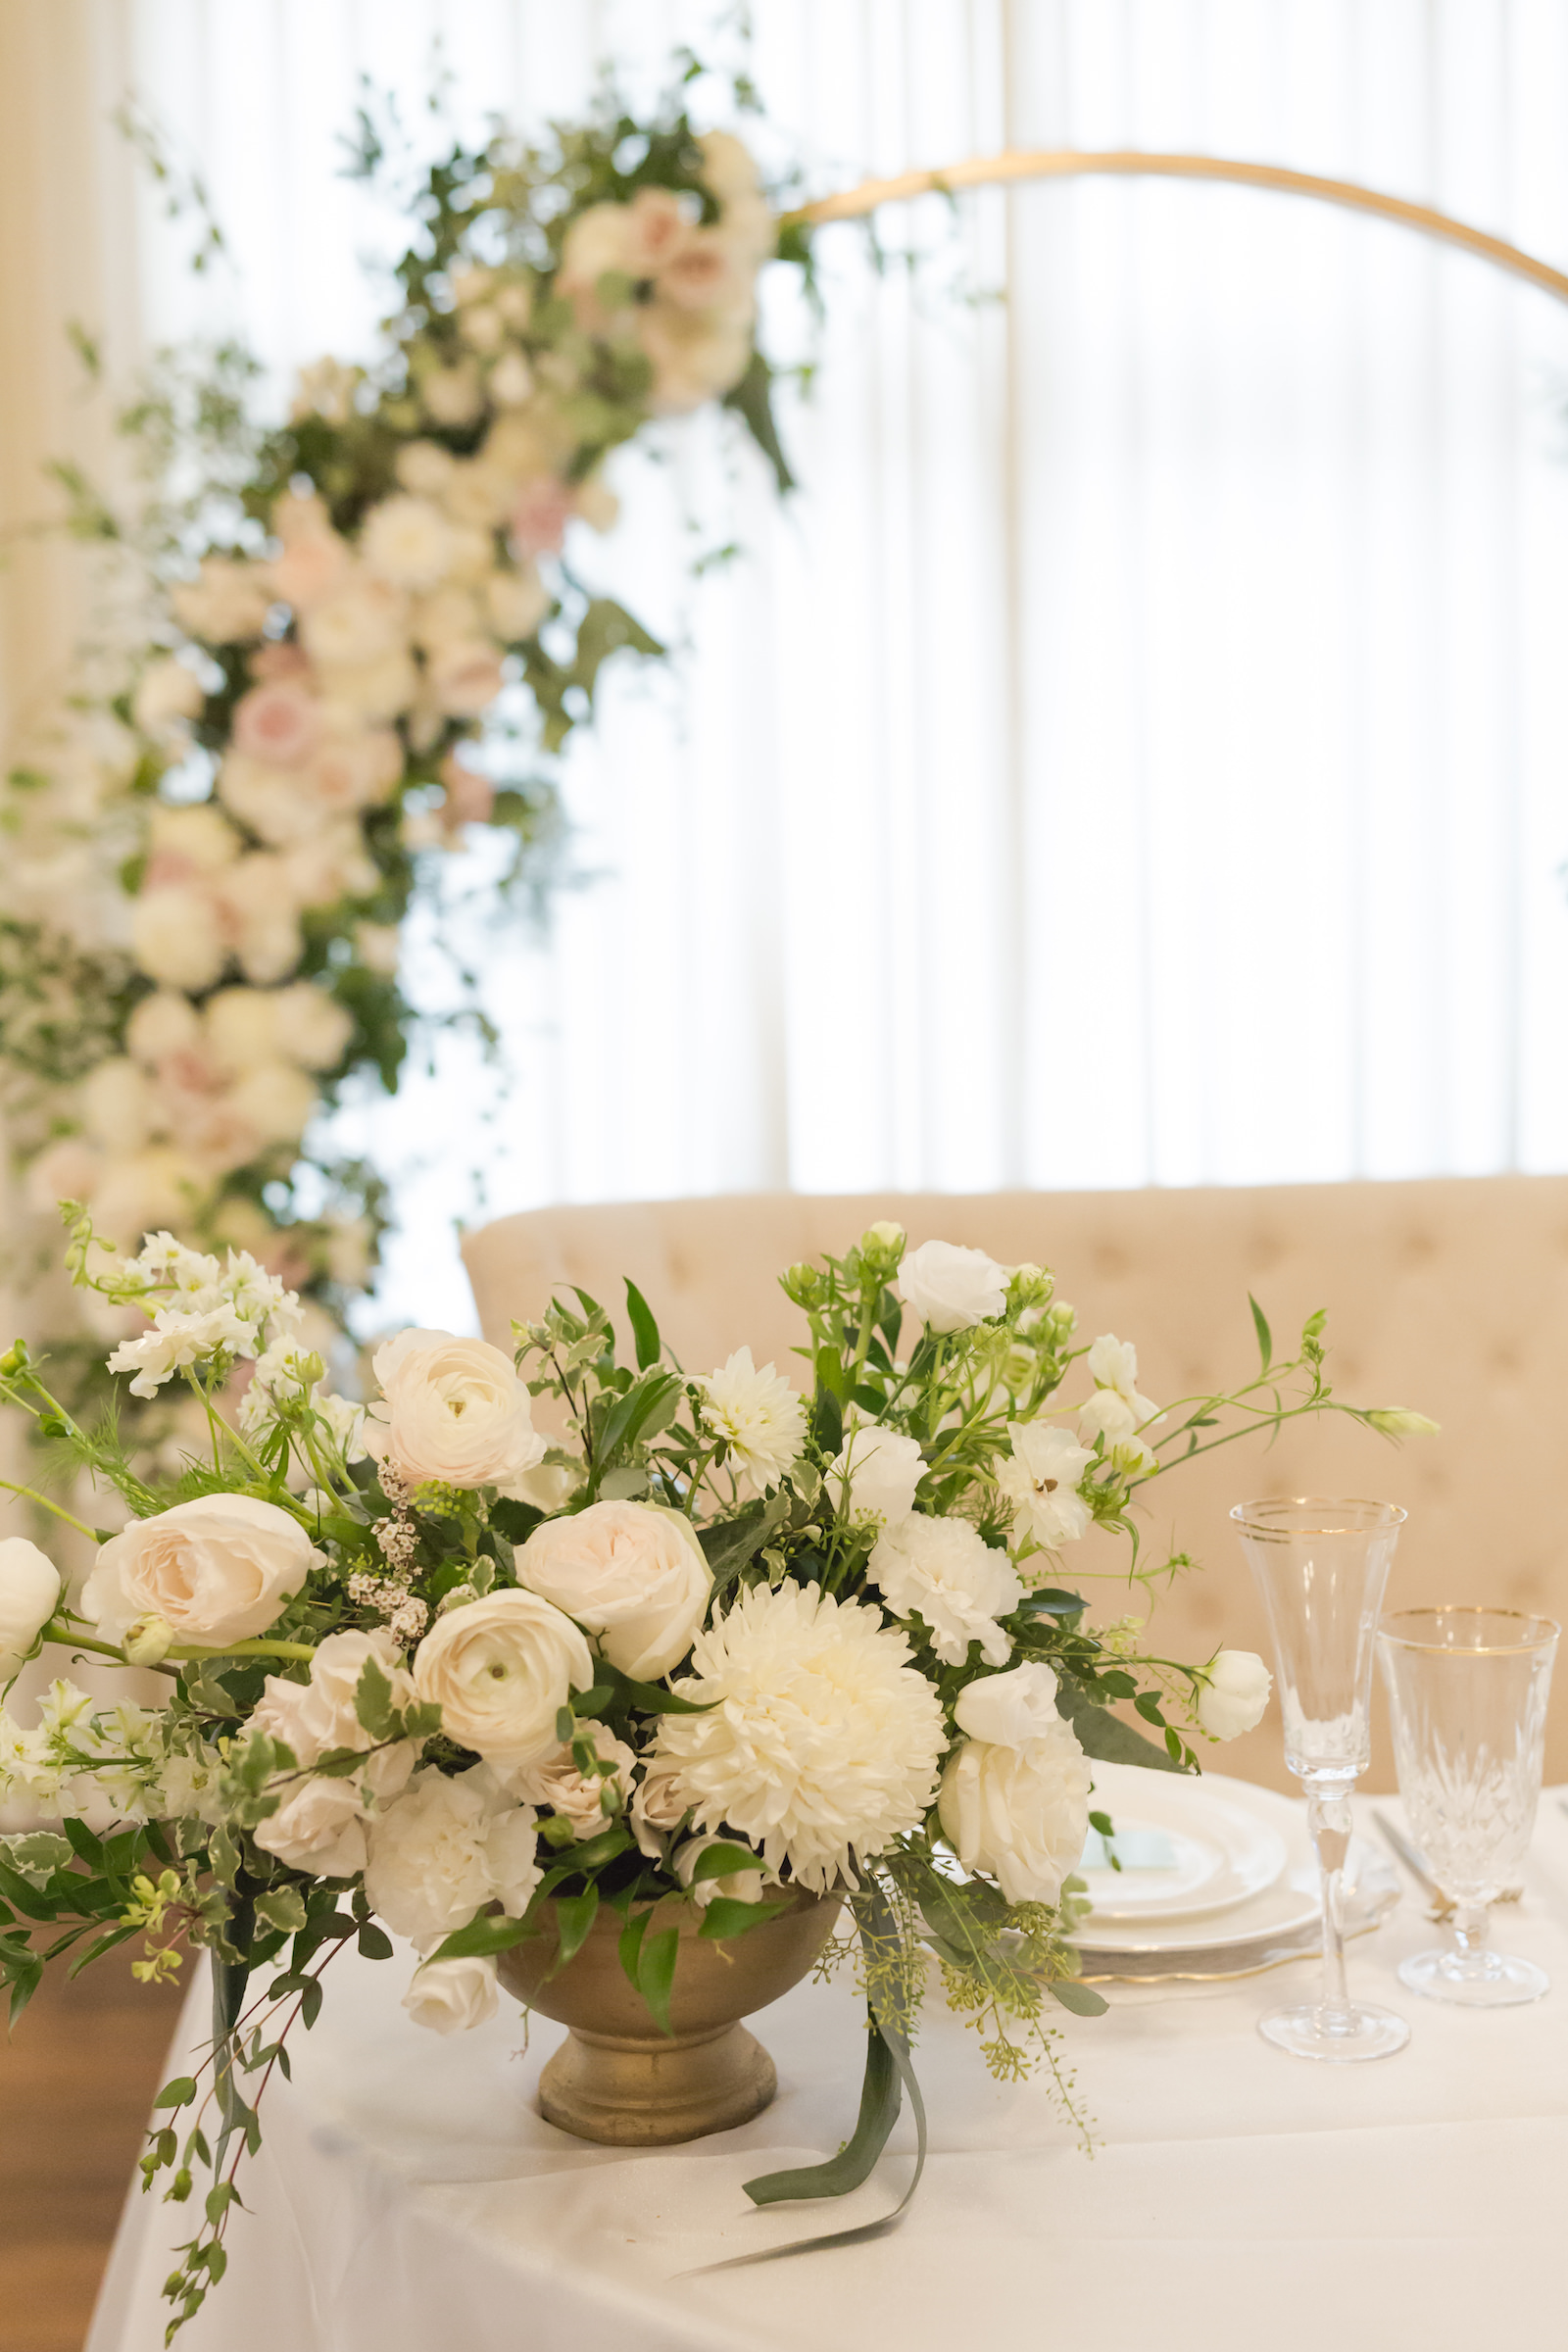 Southern Charm classic and traditional wedding reception decor, lush white and greenery floral centerpiece | Tampa Bay wedding planner Elegant Affairs by Design | Kate Ryan Event Rentals